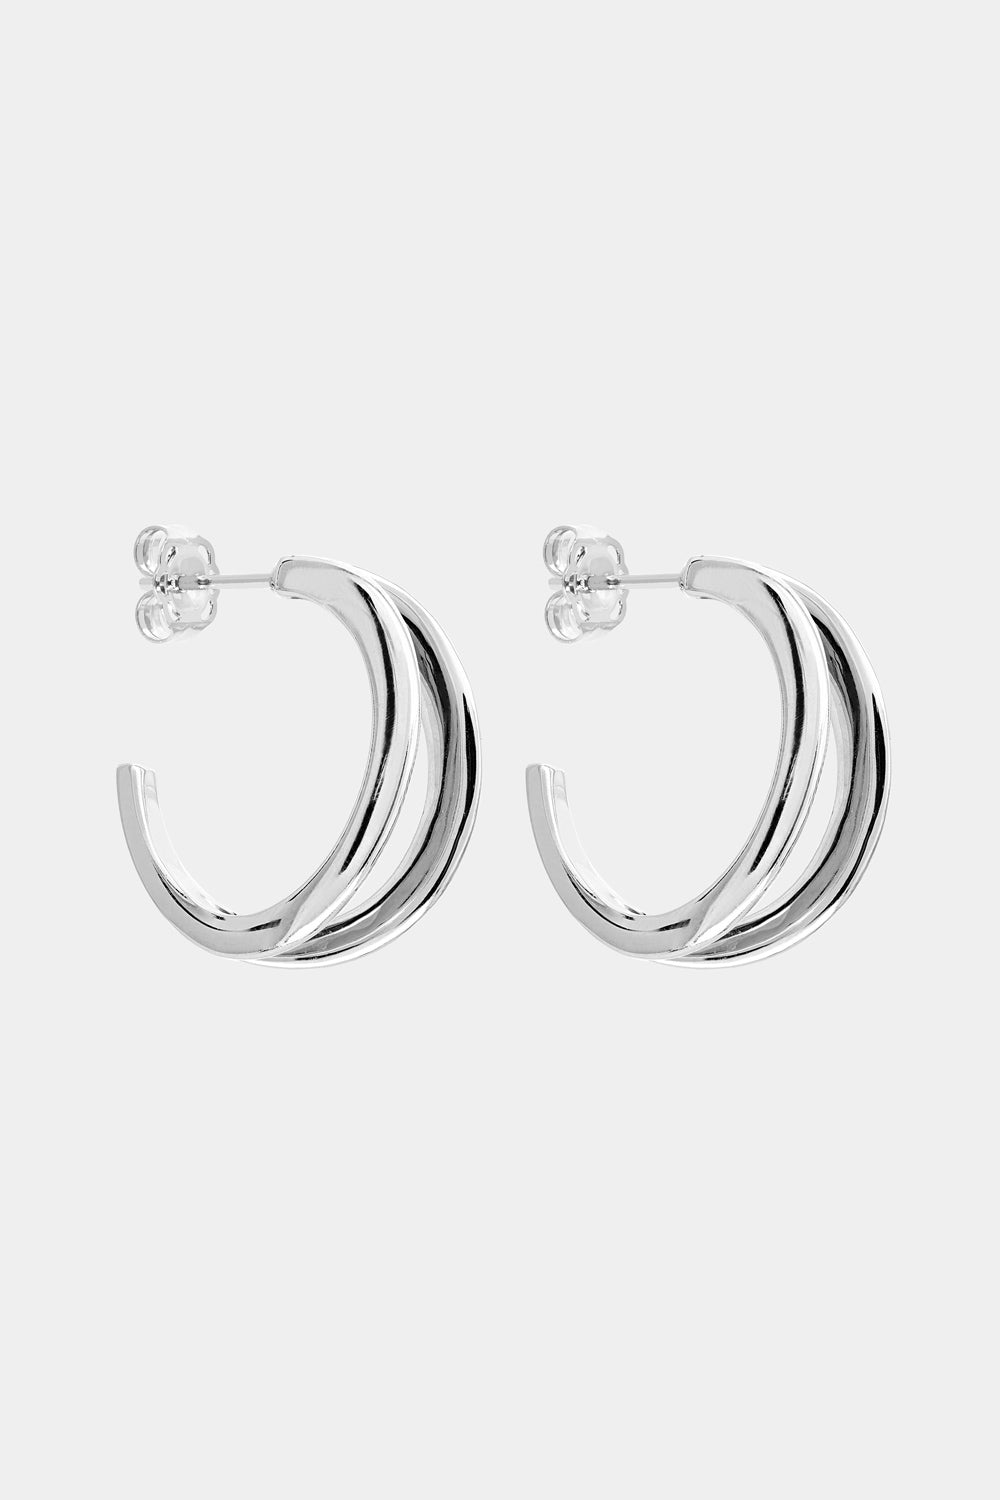 Double Band Hoops | Silver or 9K White Gold, More Options Available| Natasha Schweitzer